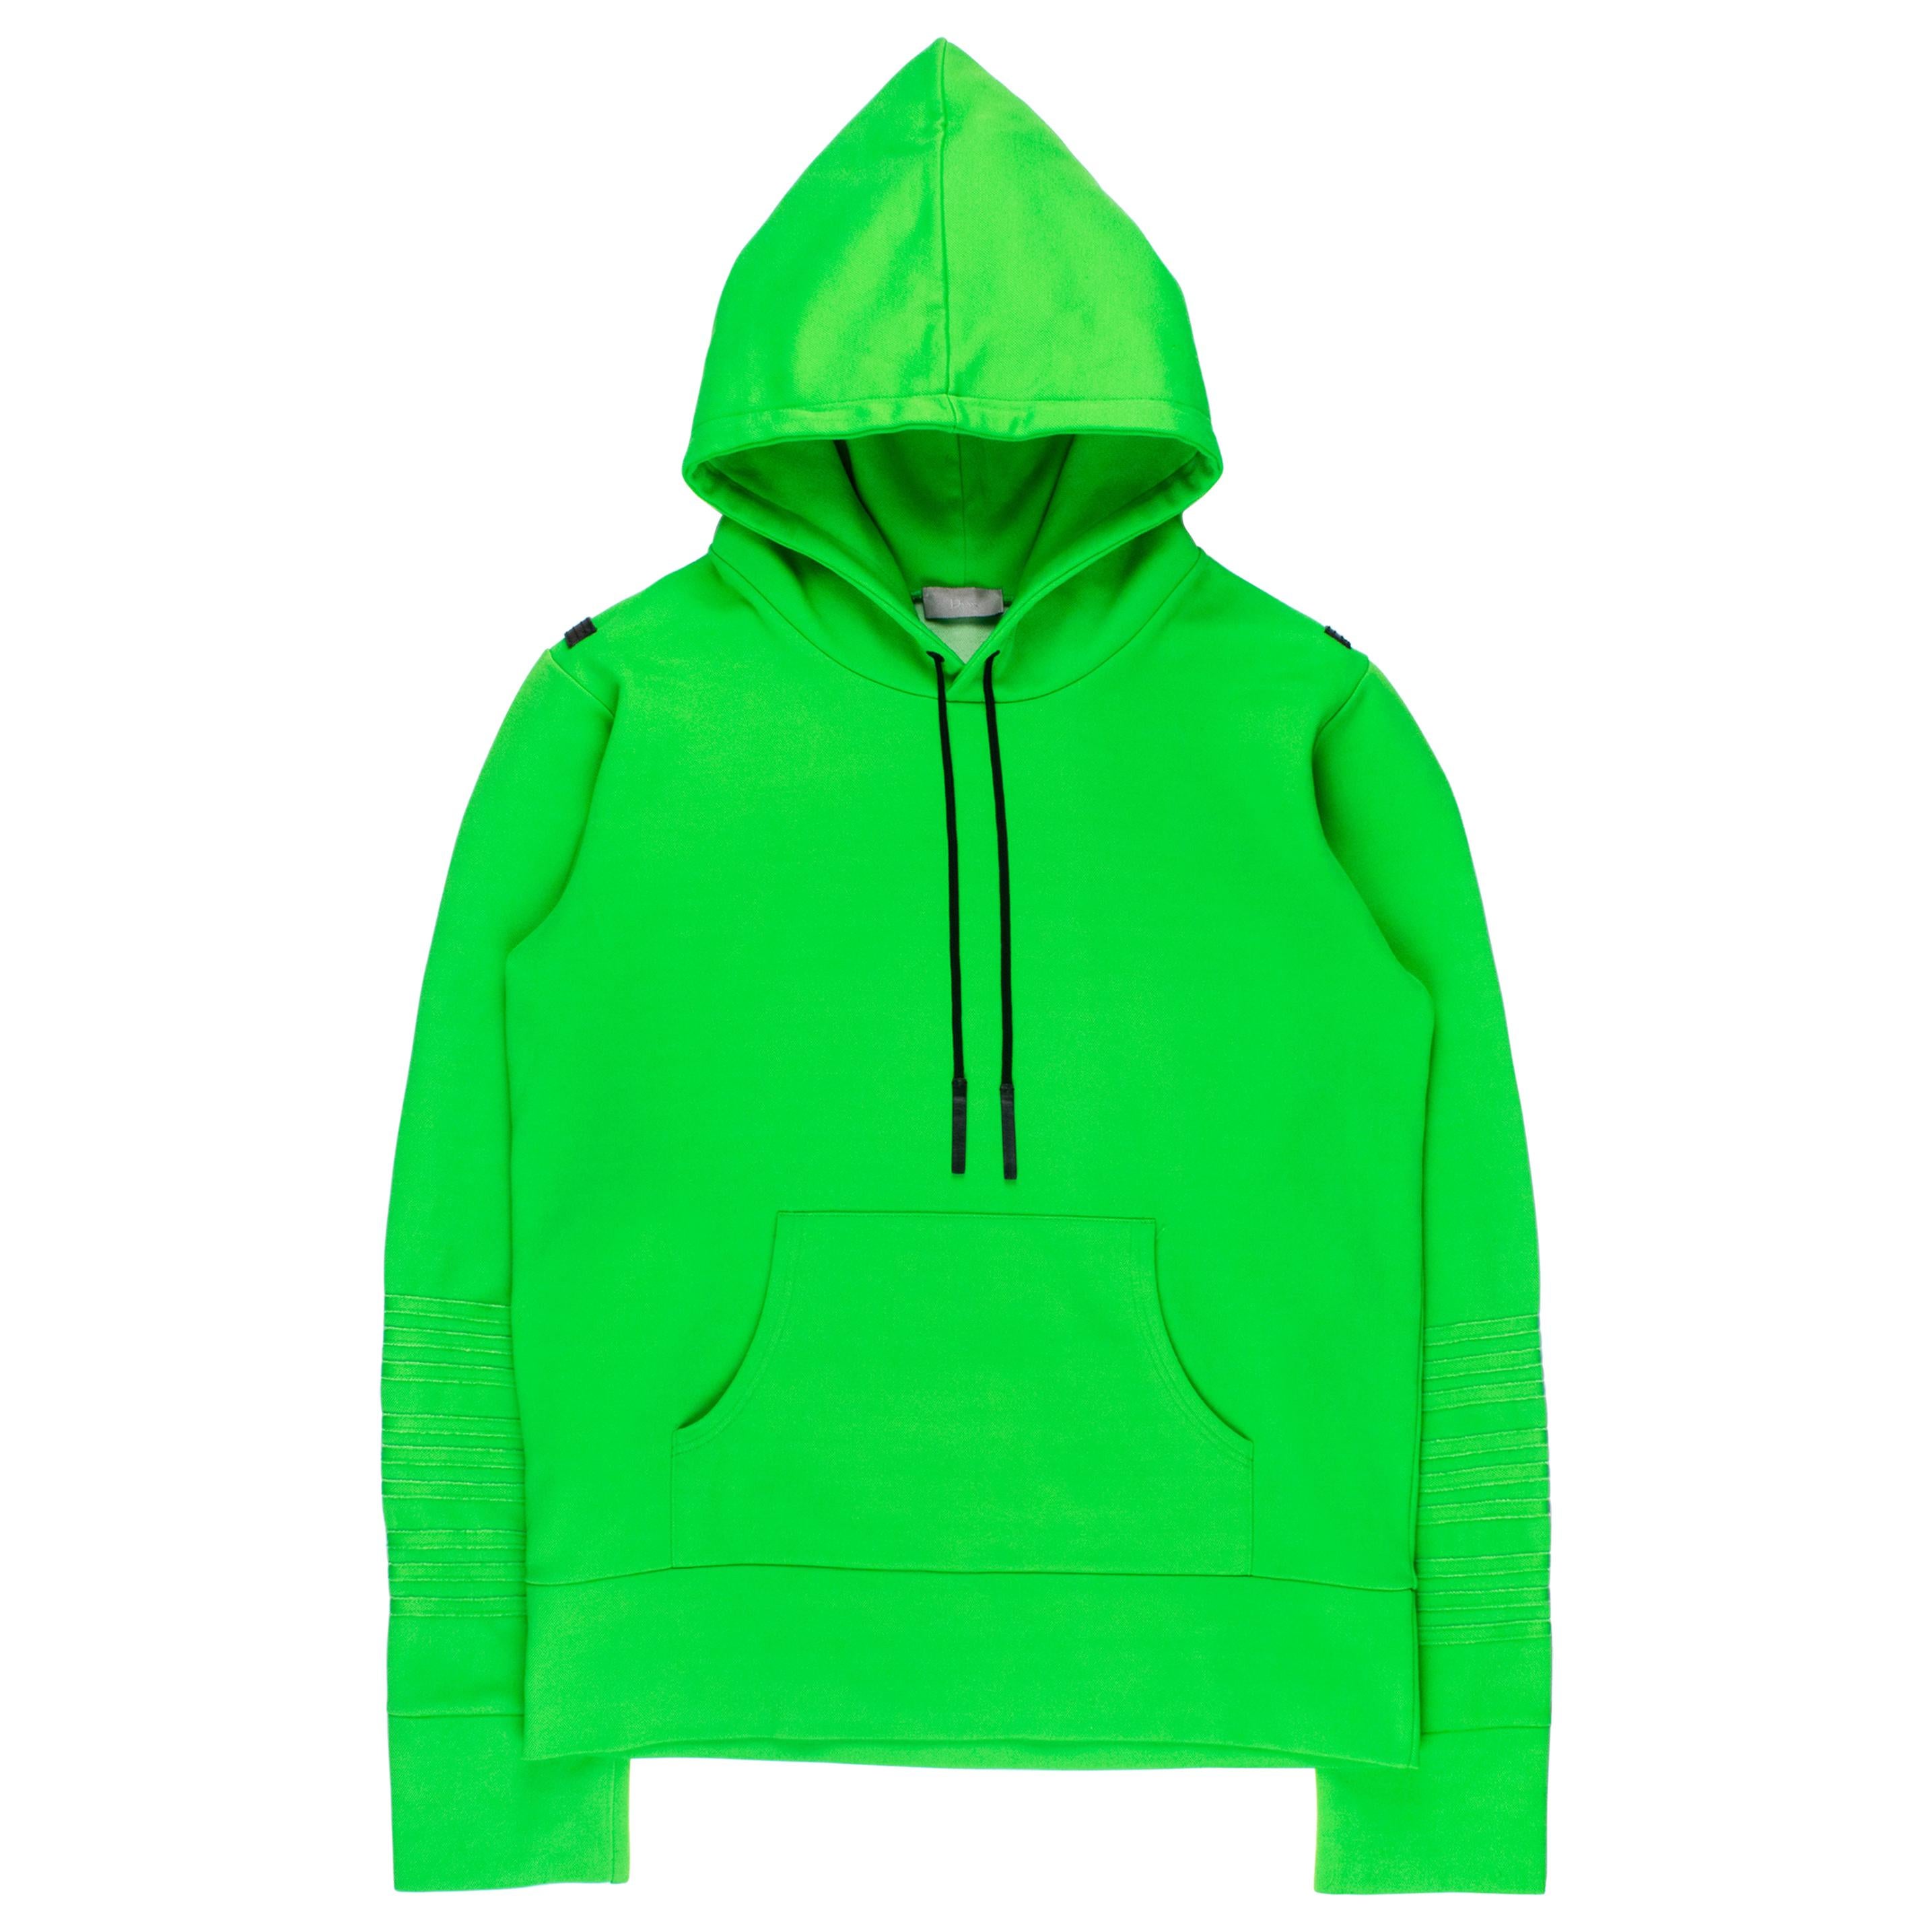 Dior Homme AW2003 "Luster" Neon Hoodie